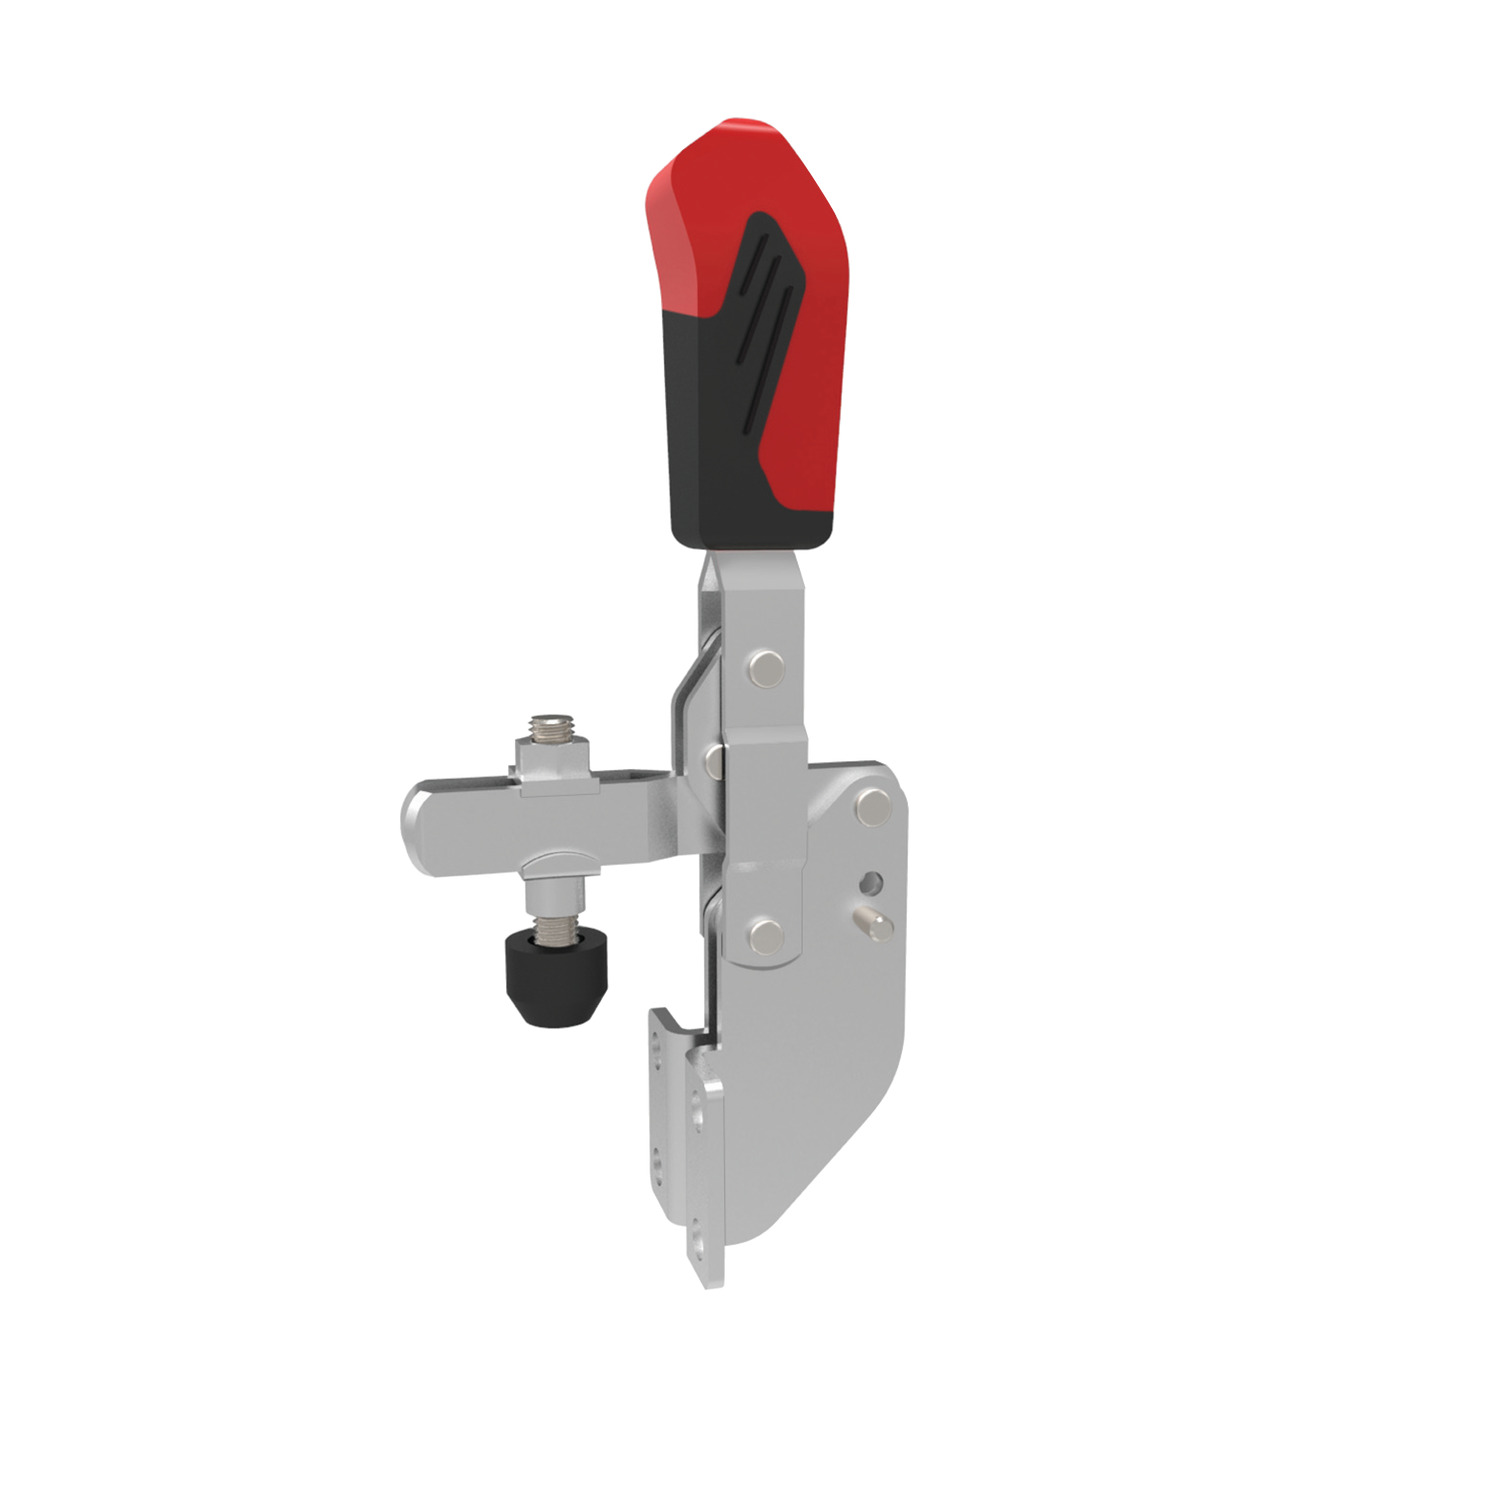 Vertical Acting Toggle Clamps Vertical acting toggle clamps with an angle base for fastening to mounting plates. Zinc plated steel body with an Ergonomic, oil resistant handle.